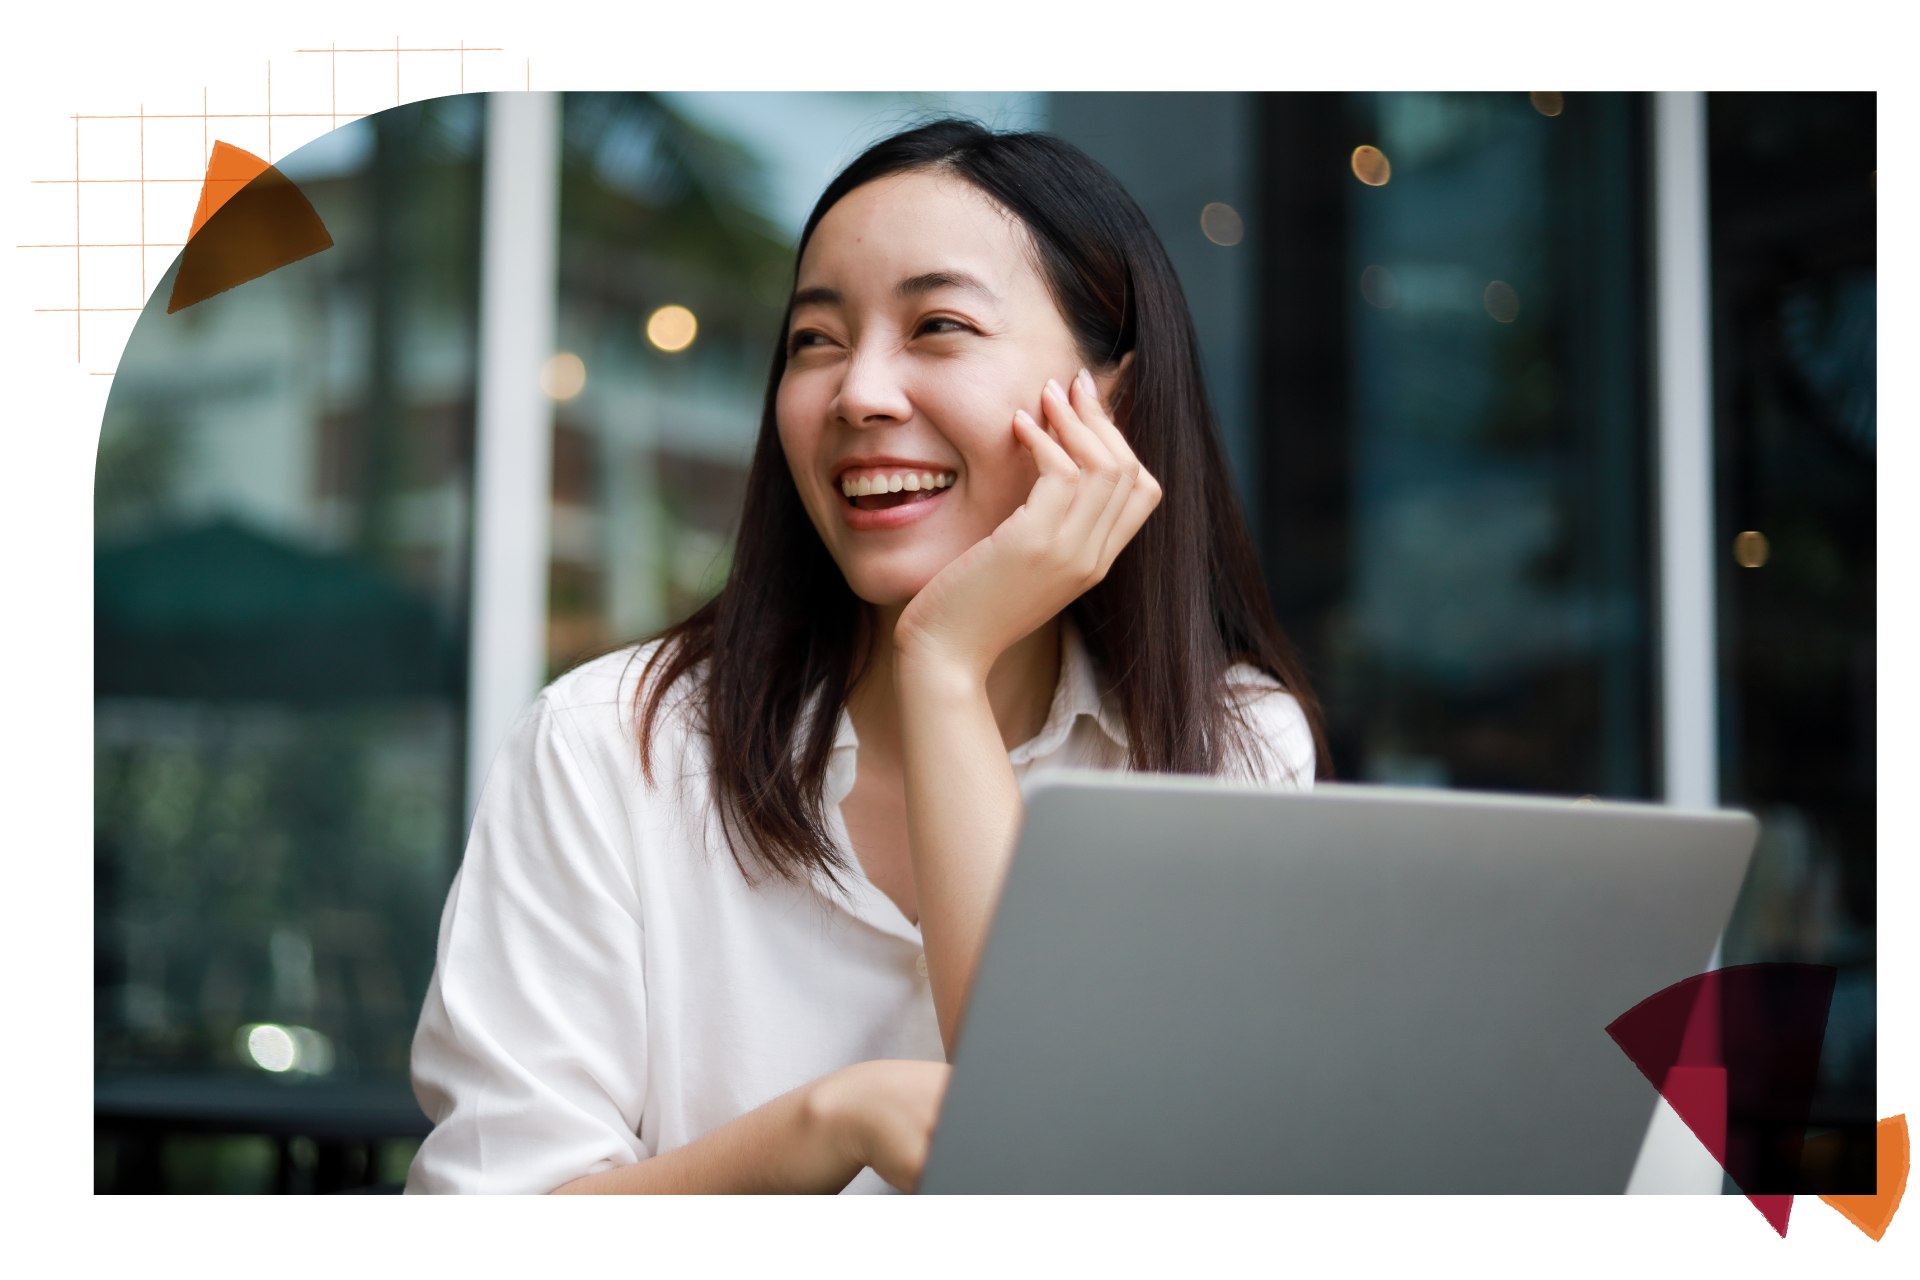 An asian woman with brunette mediem length hair is sitting outside with her laptop open and sitting at a table. She is smiling with her hand propped up against her chin and looking away from the camera towards the left.